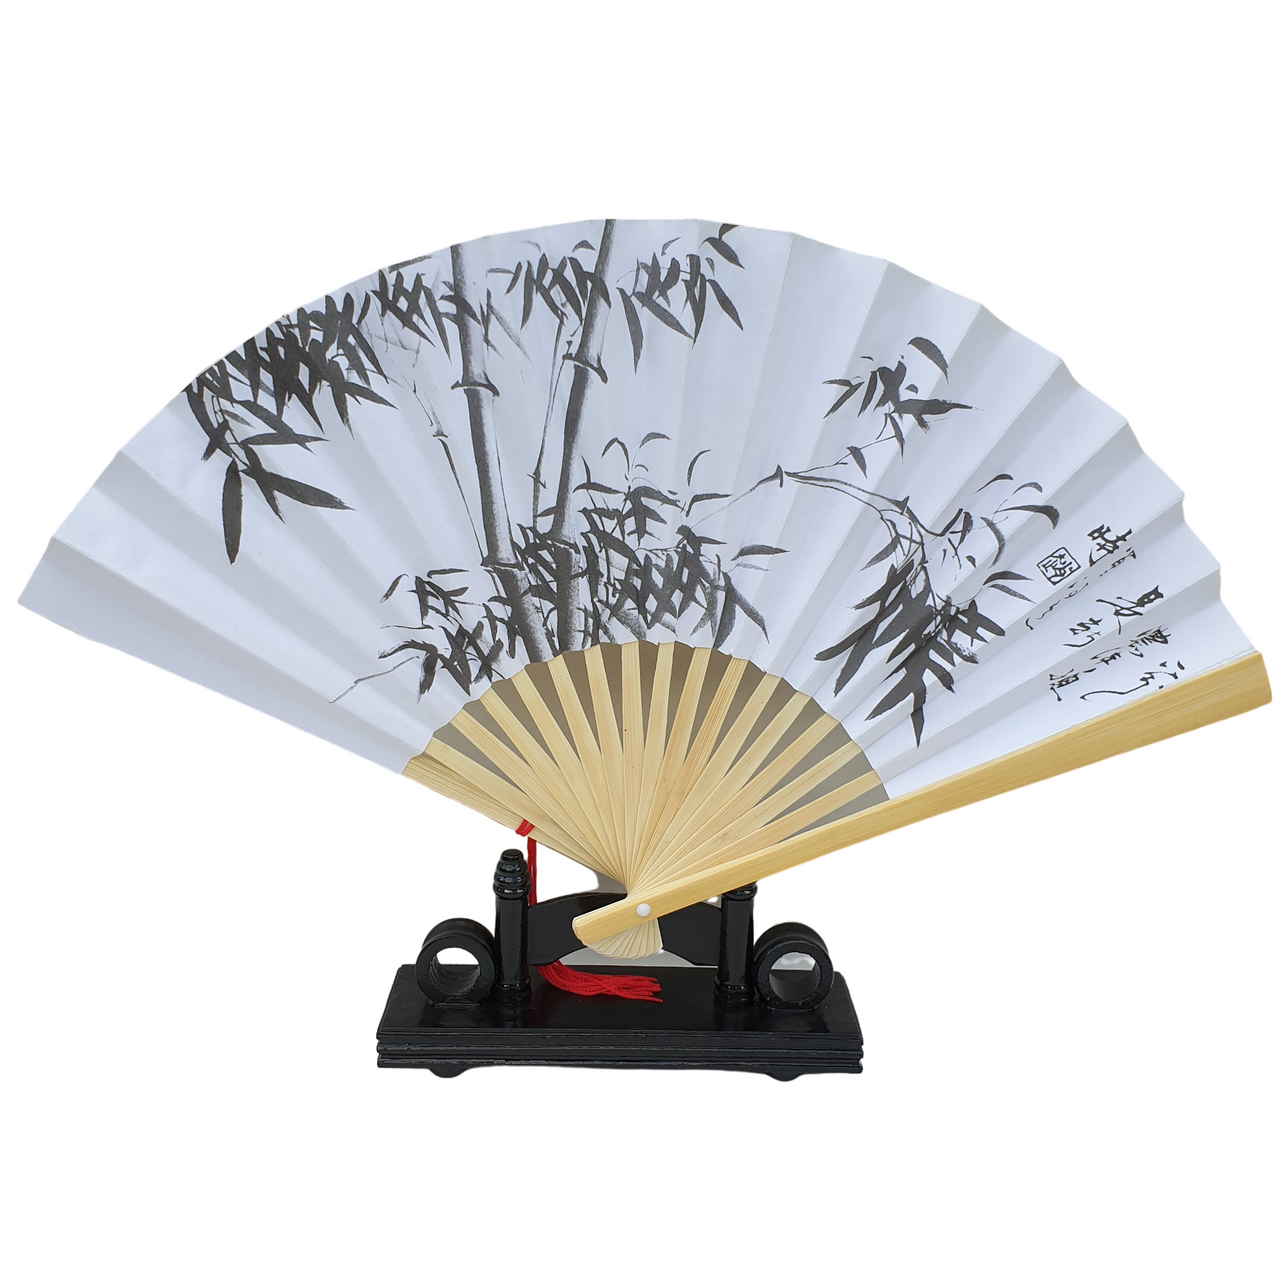 Chinese Fan - Paper and Bamboo - Painted Doves Picture - 23cm